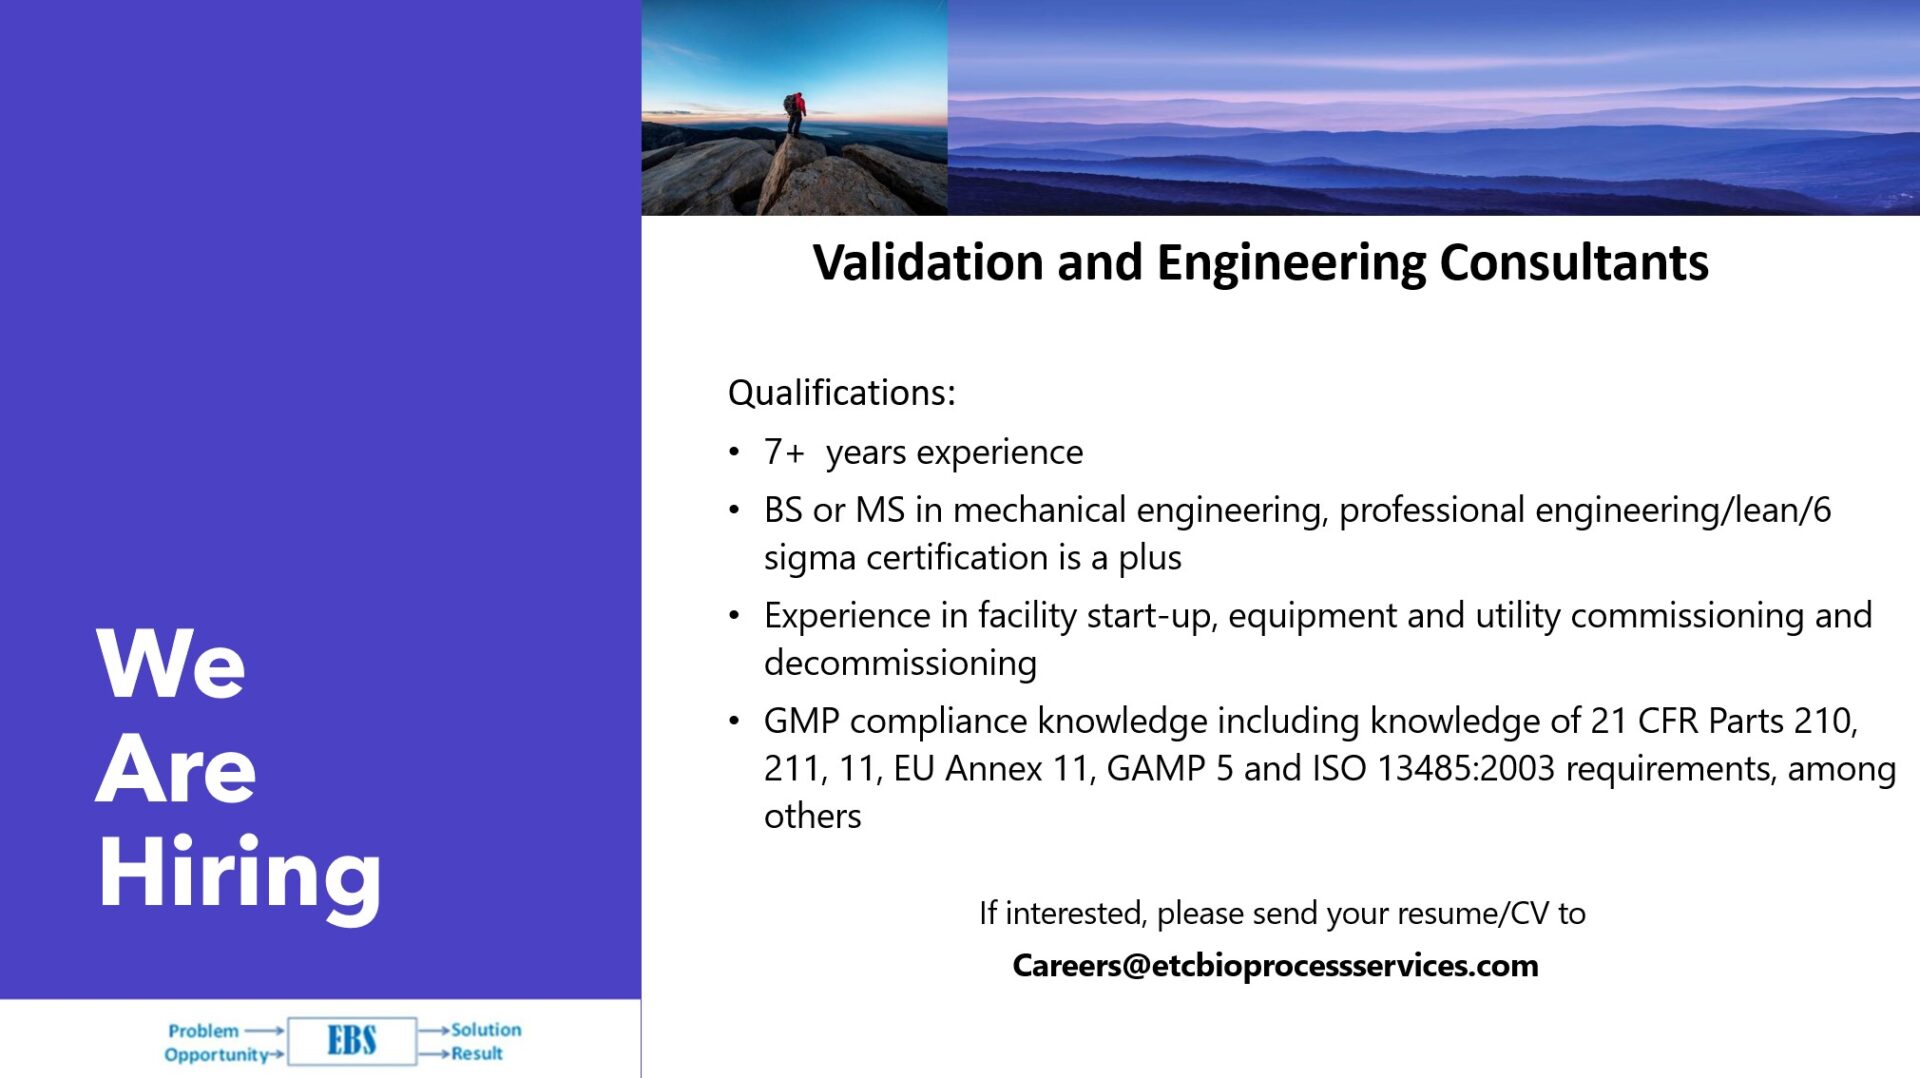 Validation and Engineering Consultants